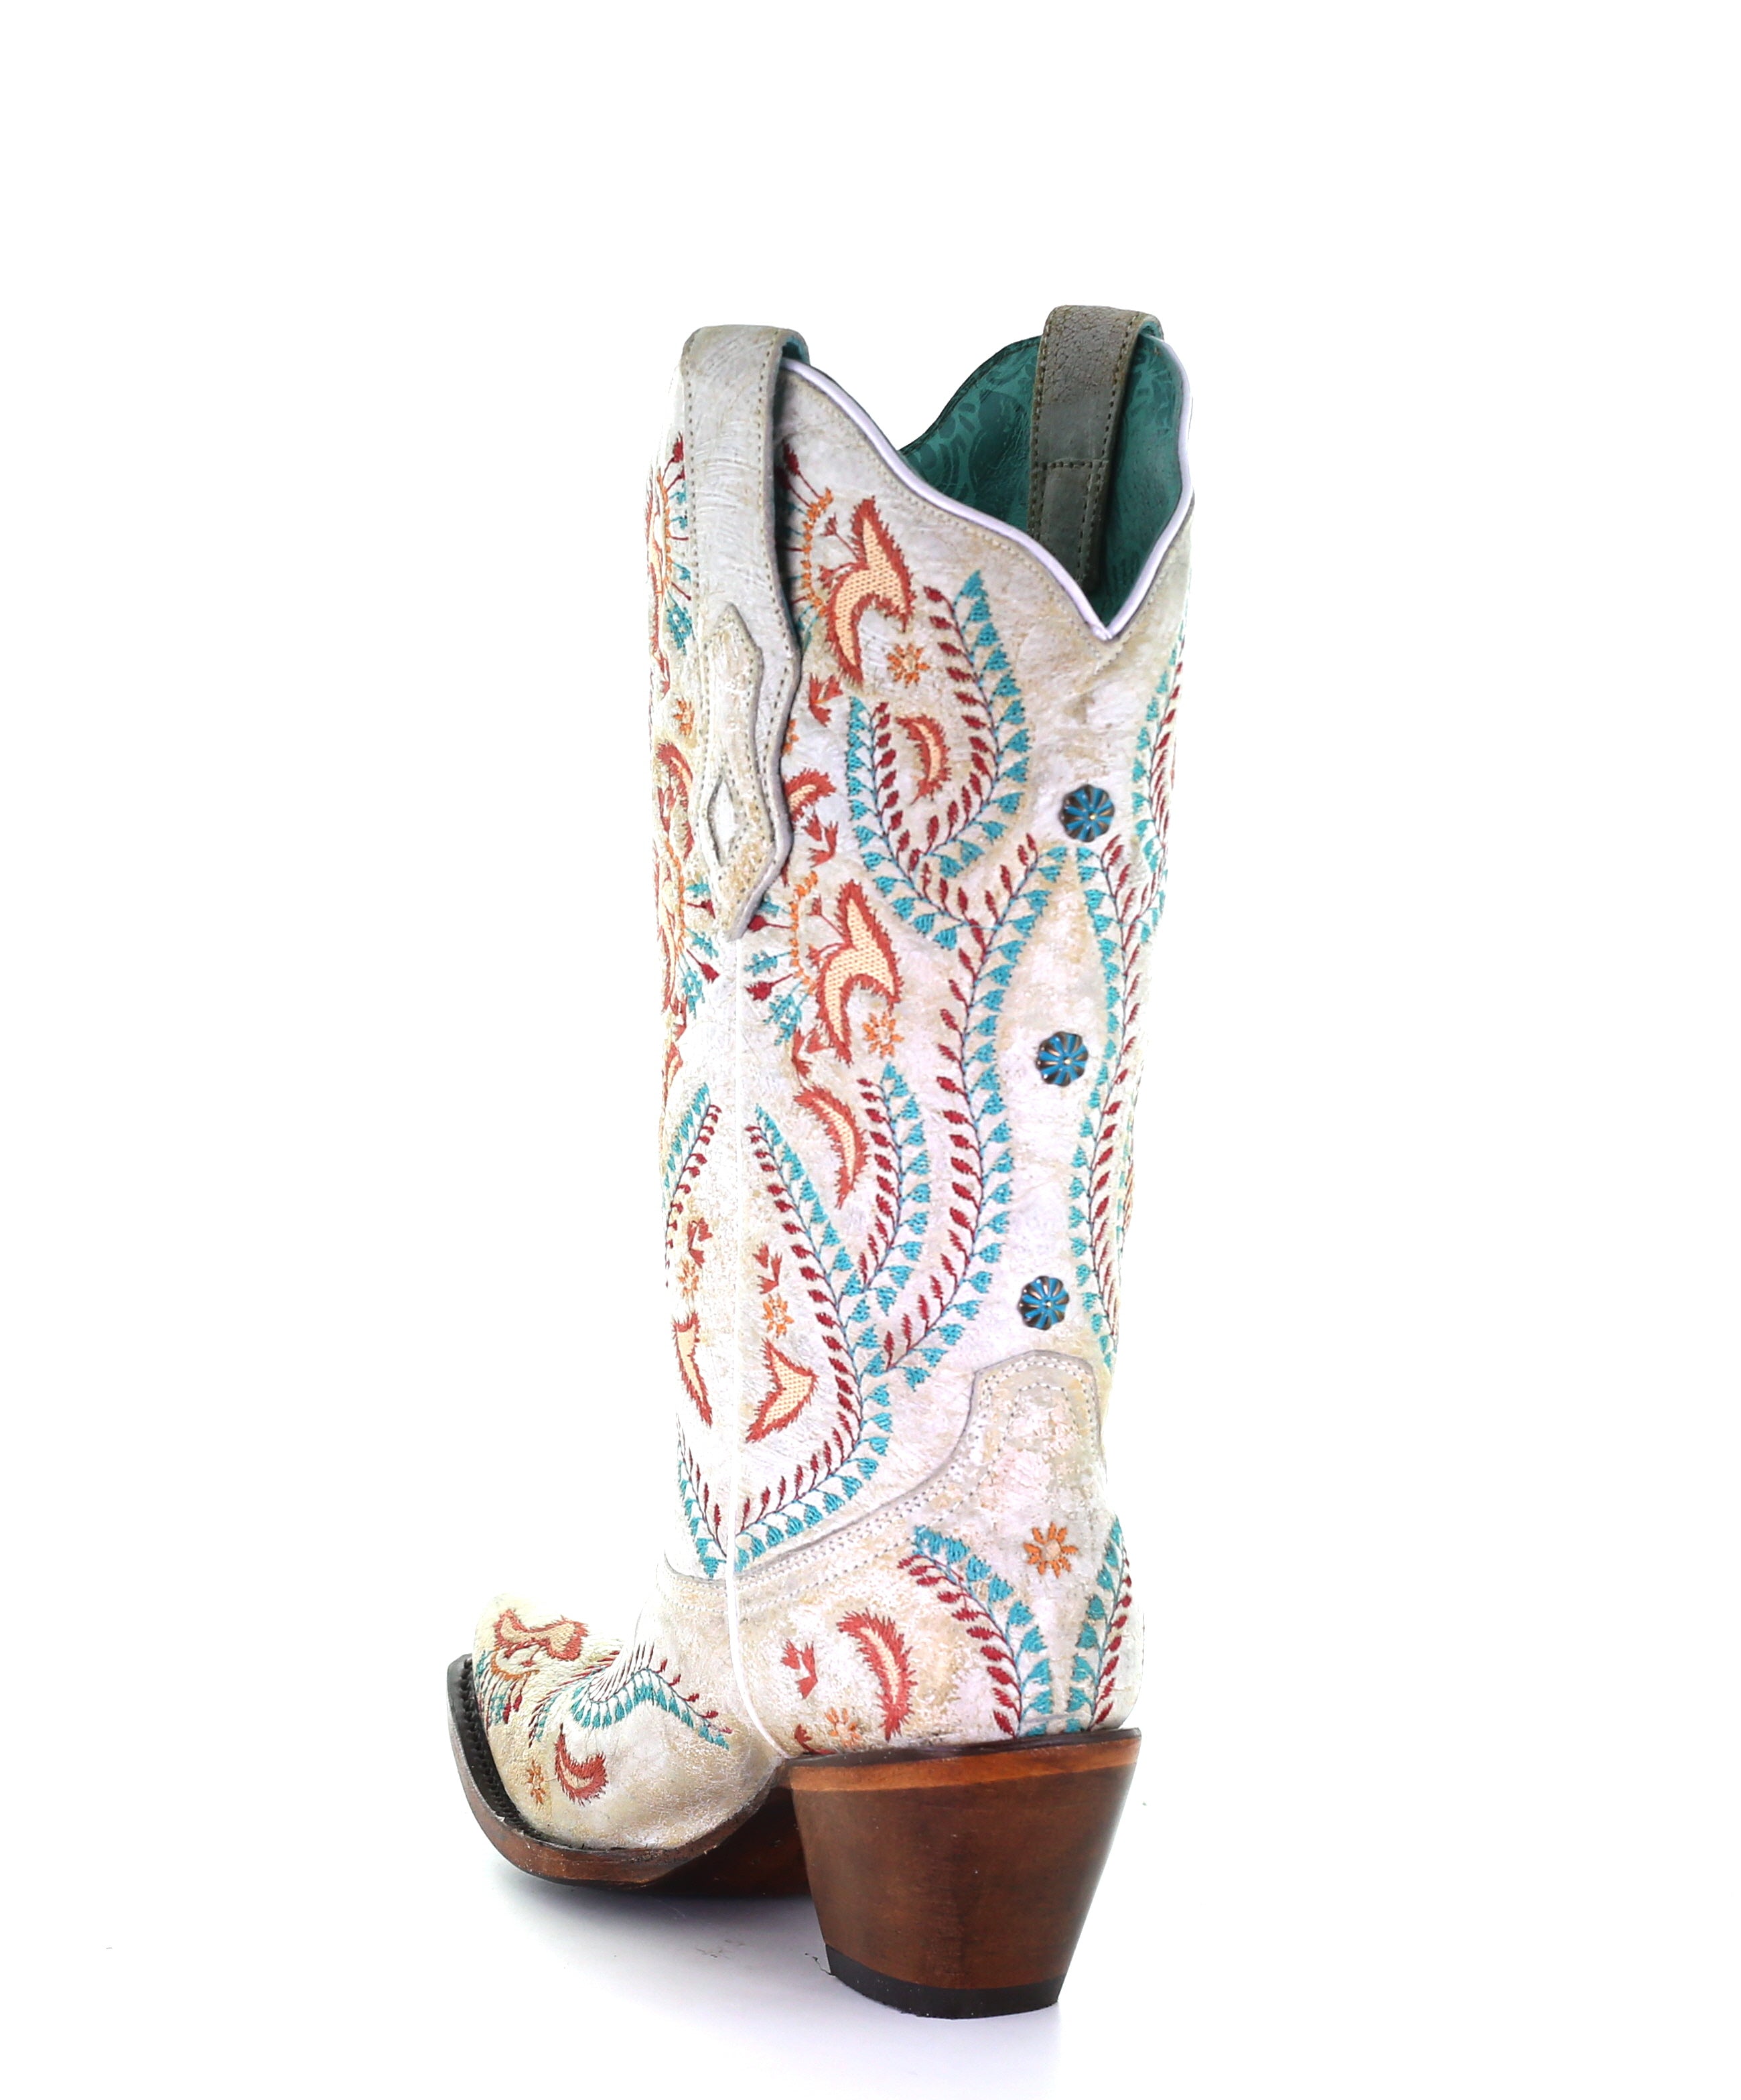 Ladies Distressed Ivory Boots w/ Turquoise & Rust Embroidery & Studs